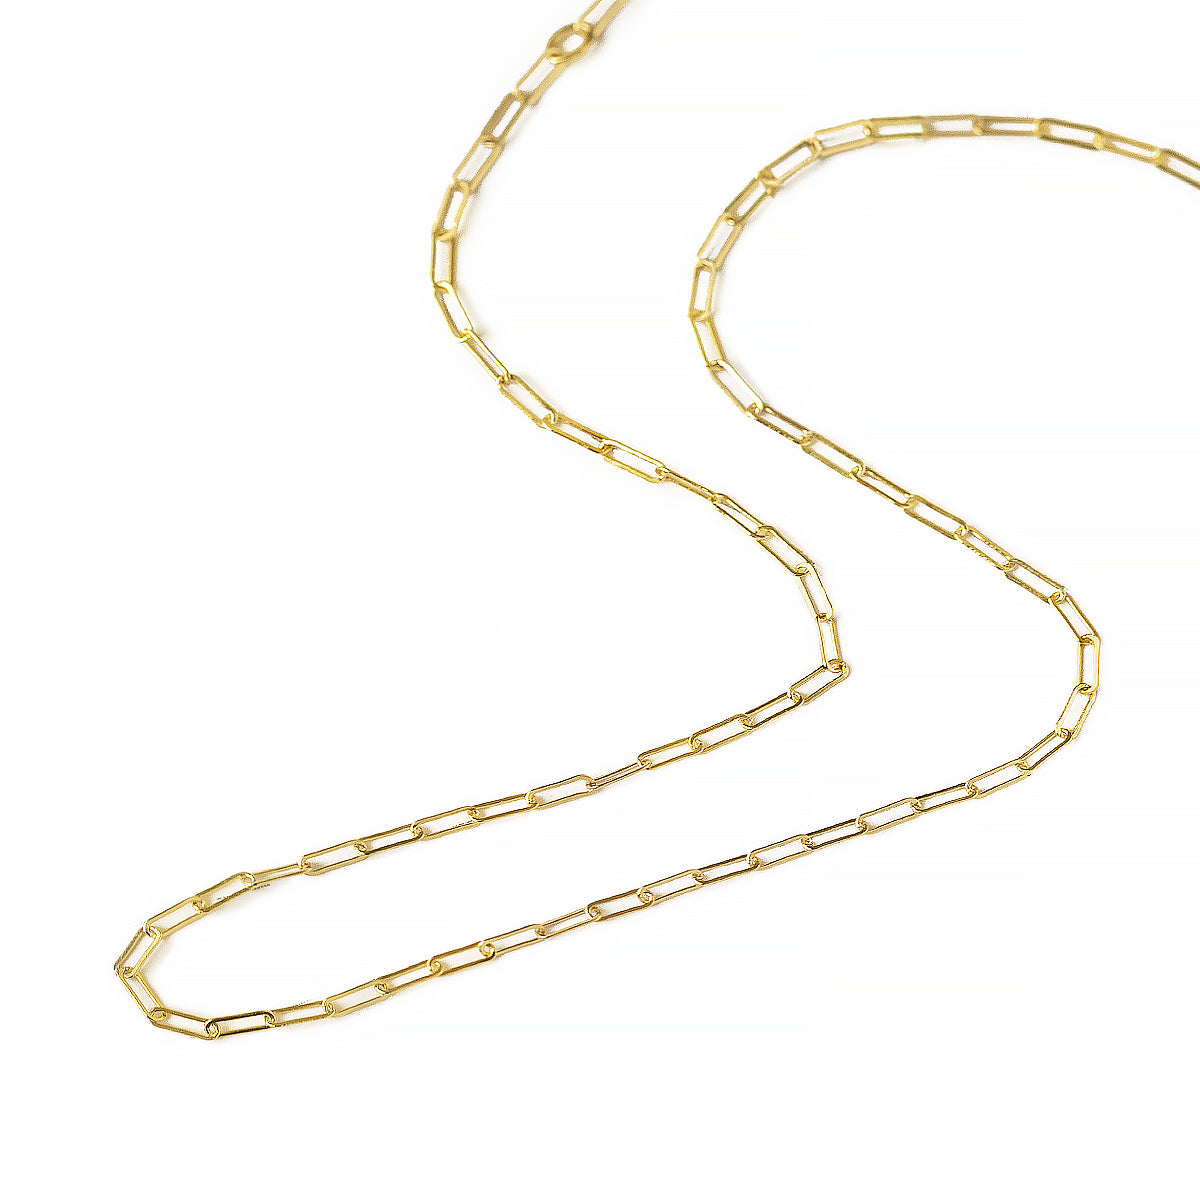 Chains and Link Jewelry: Effortless, Edgy, and Timeless Style